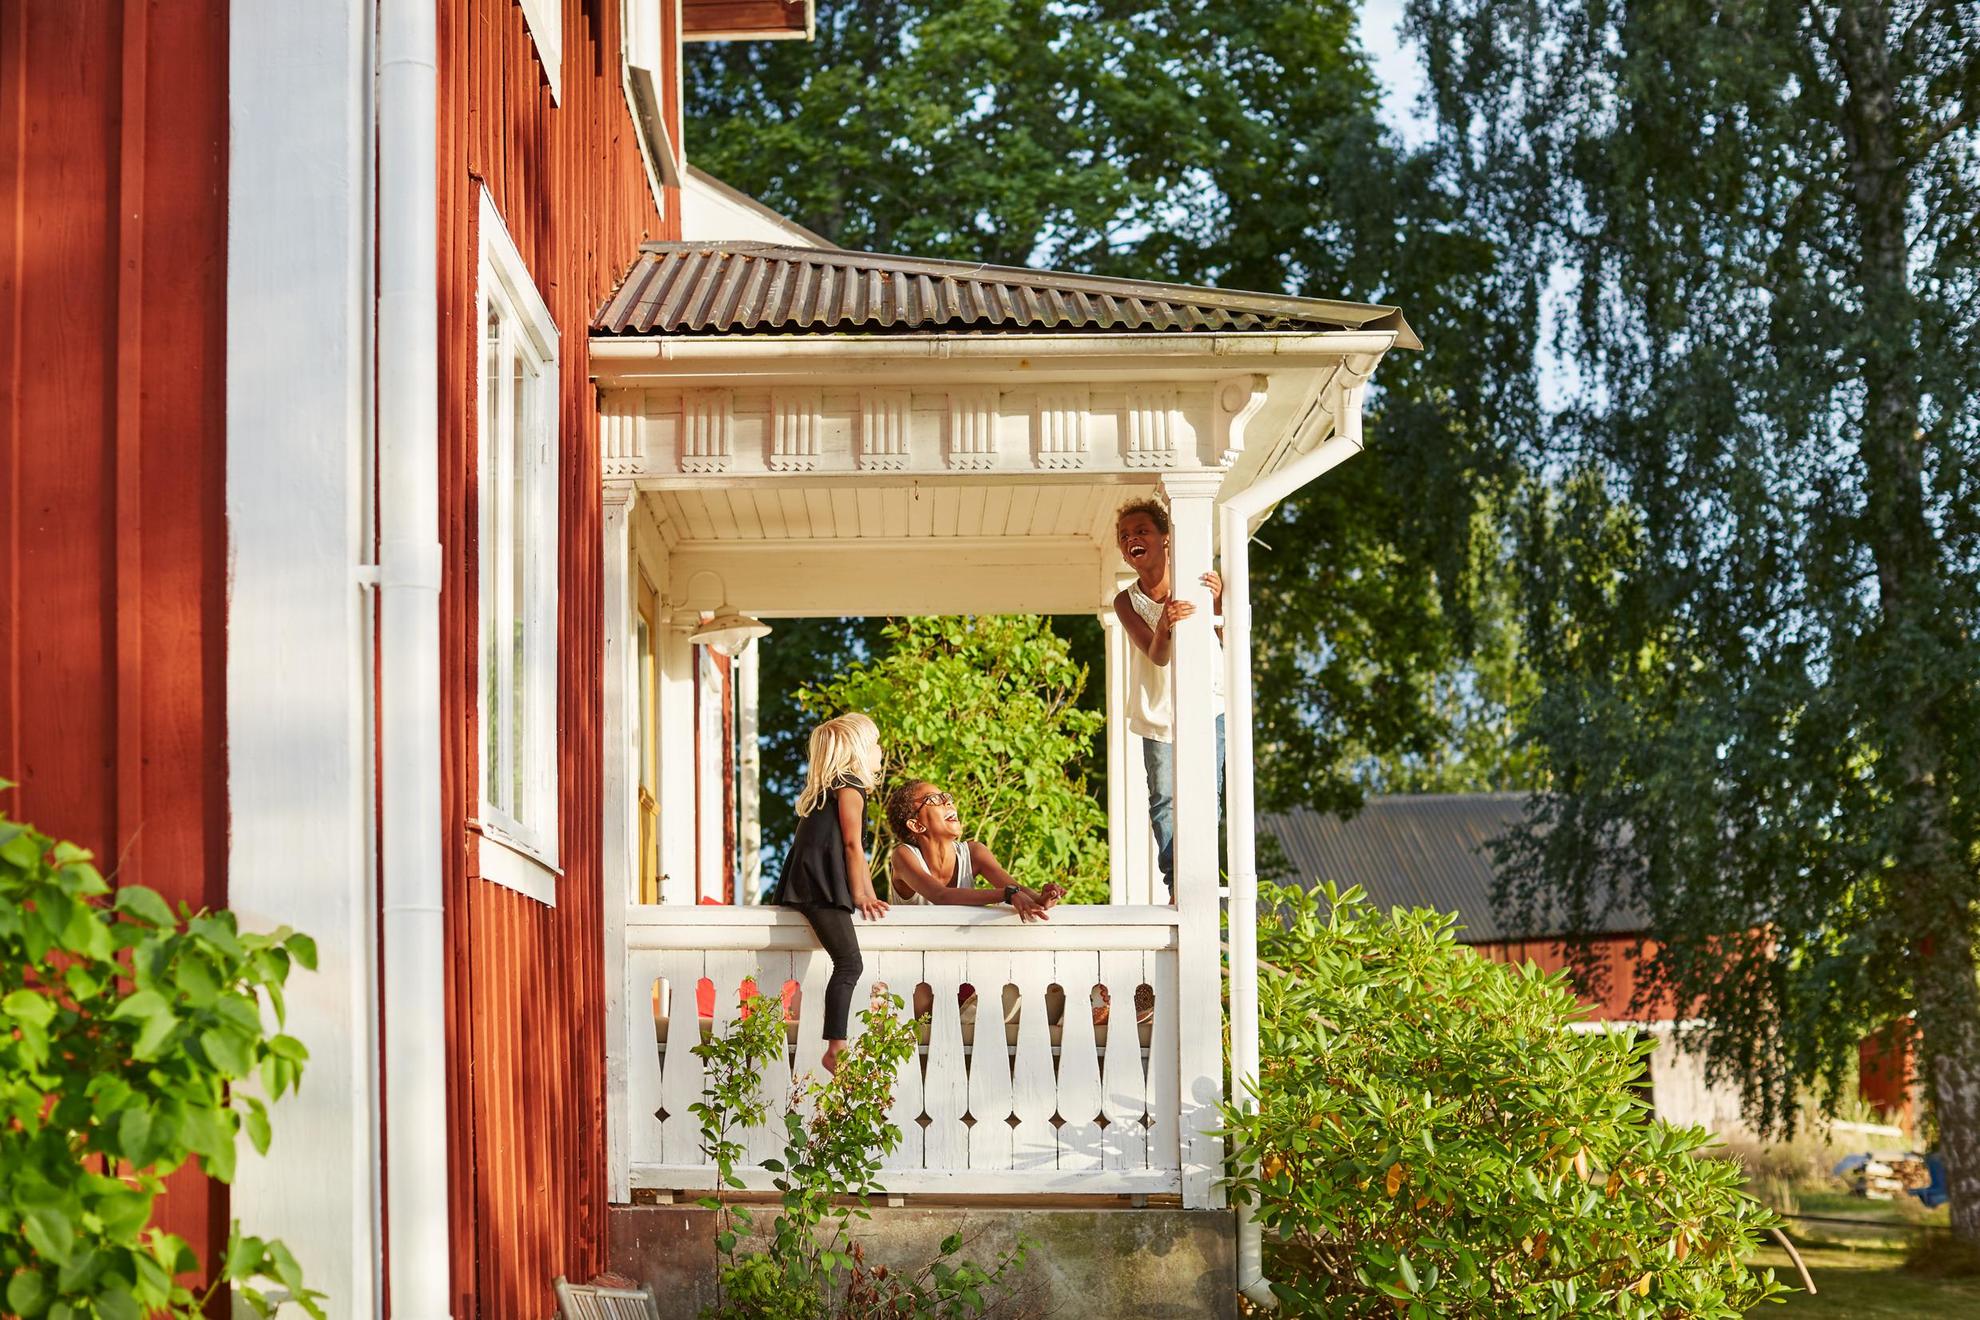 Three kids are playing on the porch of a summer house in the countryside.